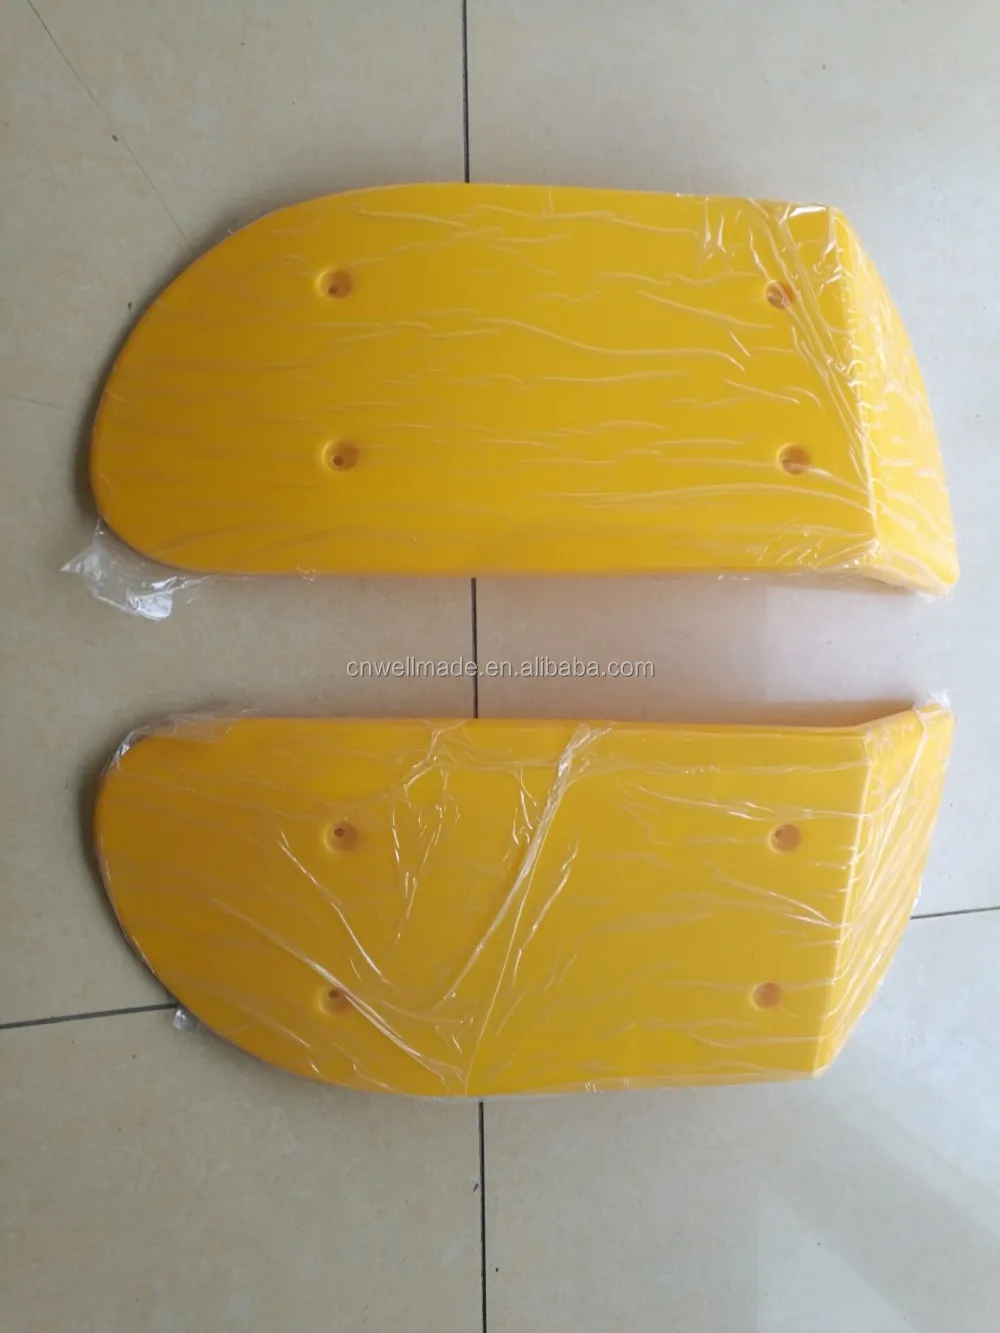 Xinyang 500cc1100cc XY500GK XY1100GK Front Fender Dune Buggy Go Kart Spare Parts